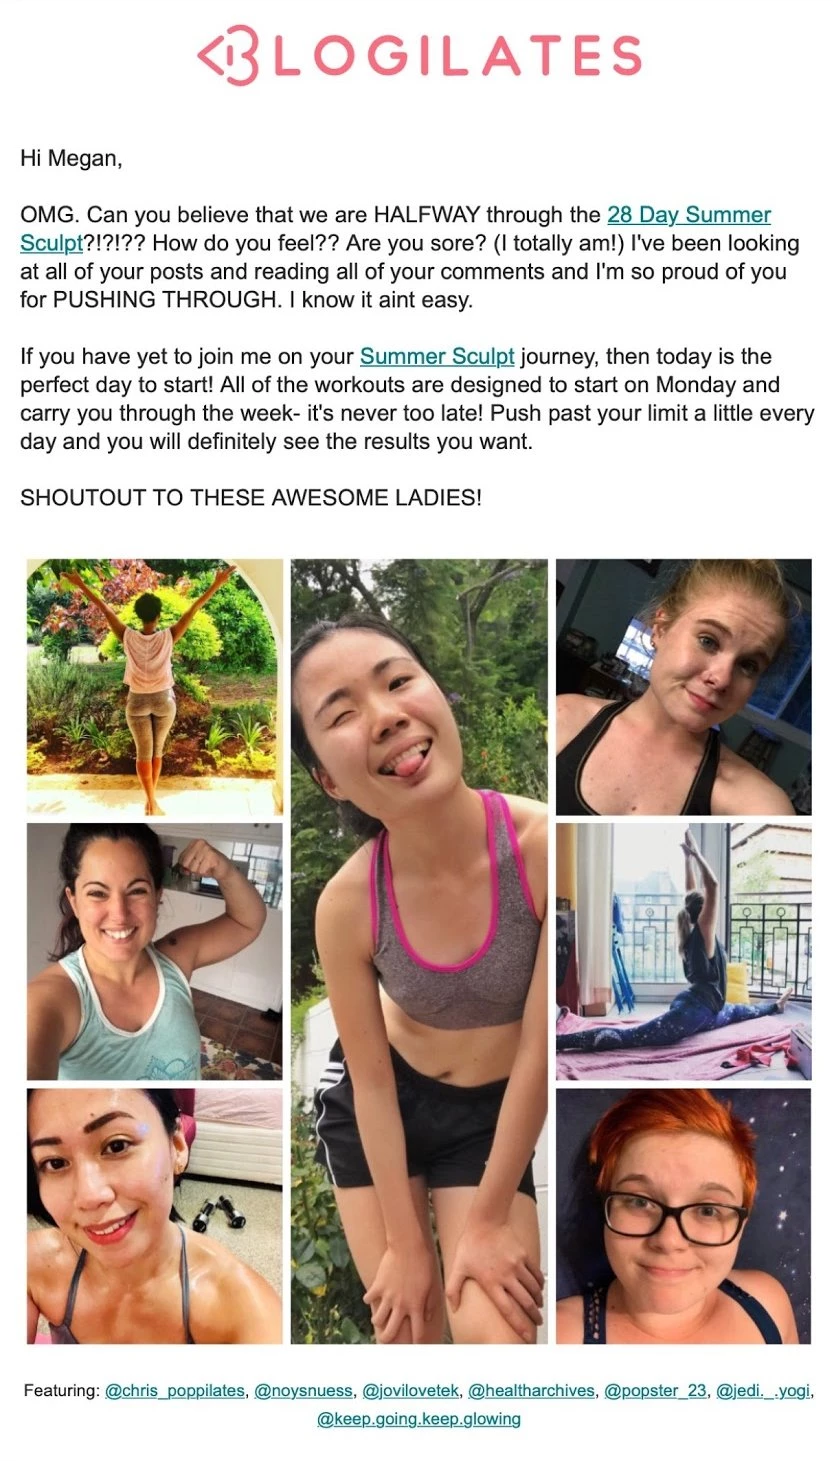 Blogilates fitness newsletter email example women group